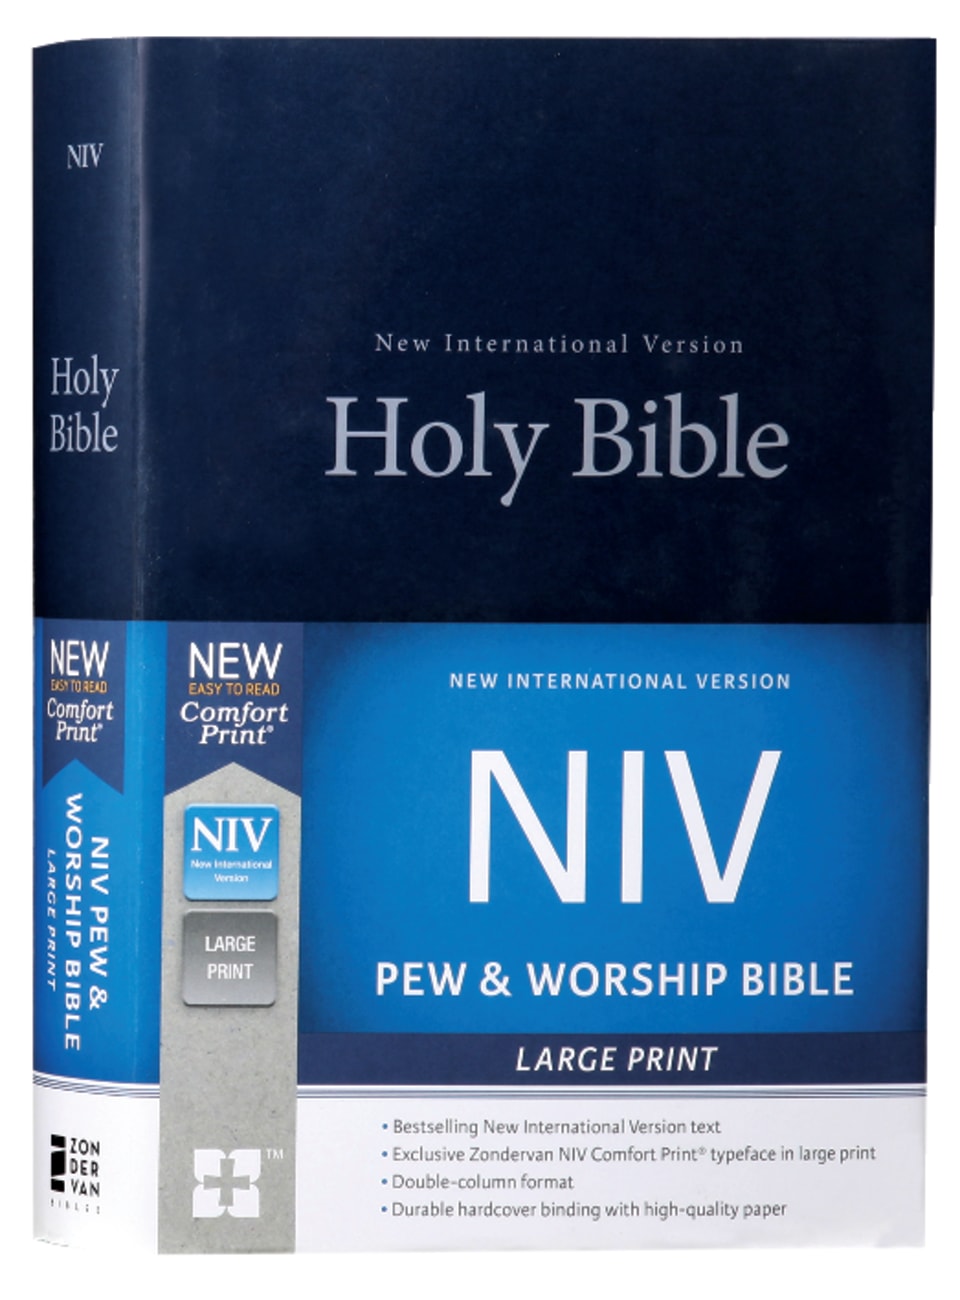 B NIV PEW AND WORSHIP BIBLE LARGE PRINT BLUE (BLACK LETTER EDITION)